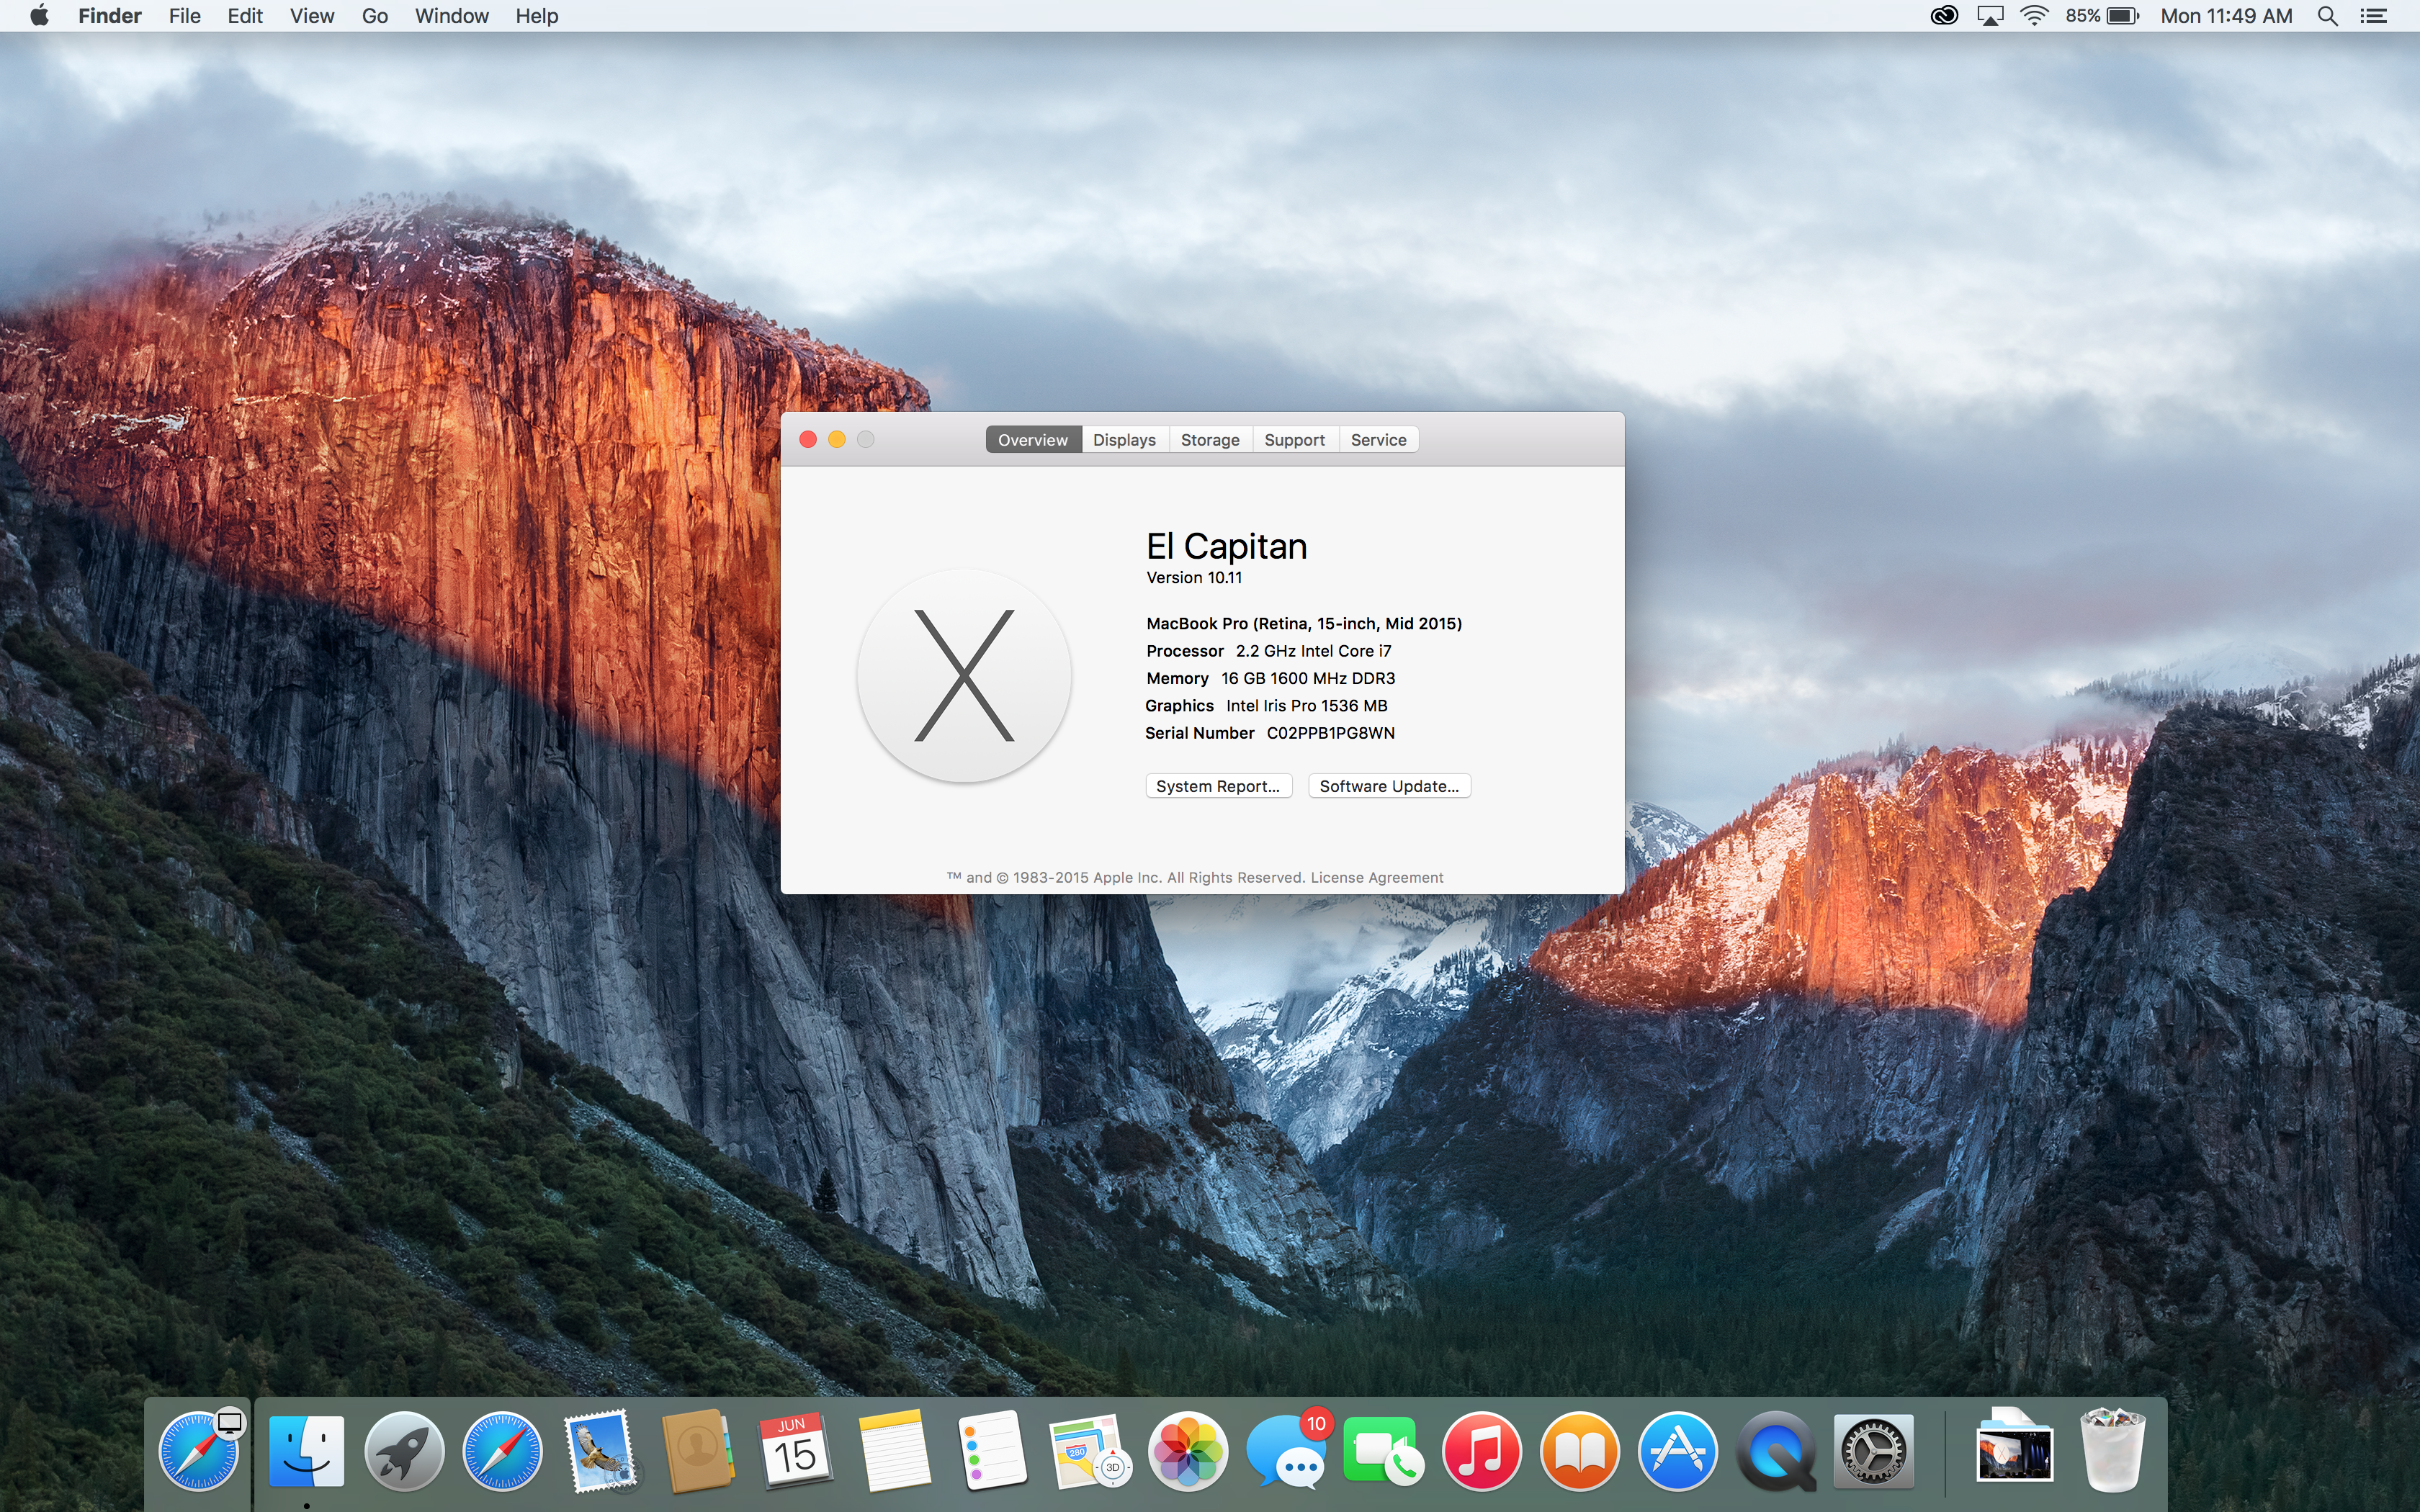 Mac Os X Updates For 10.11.6